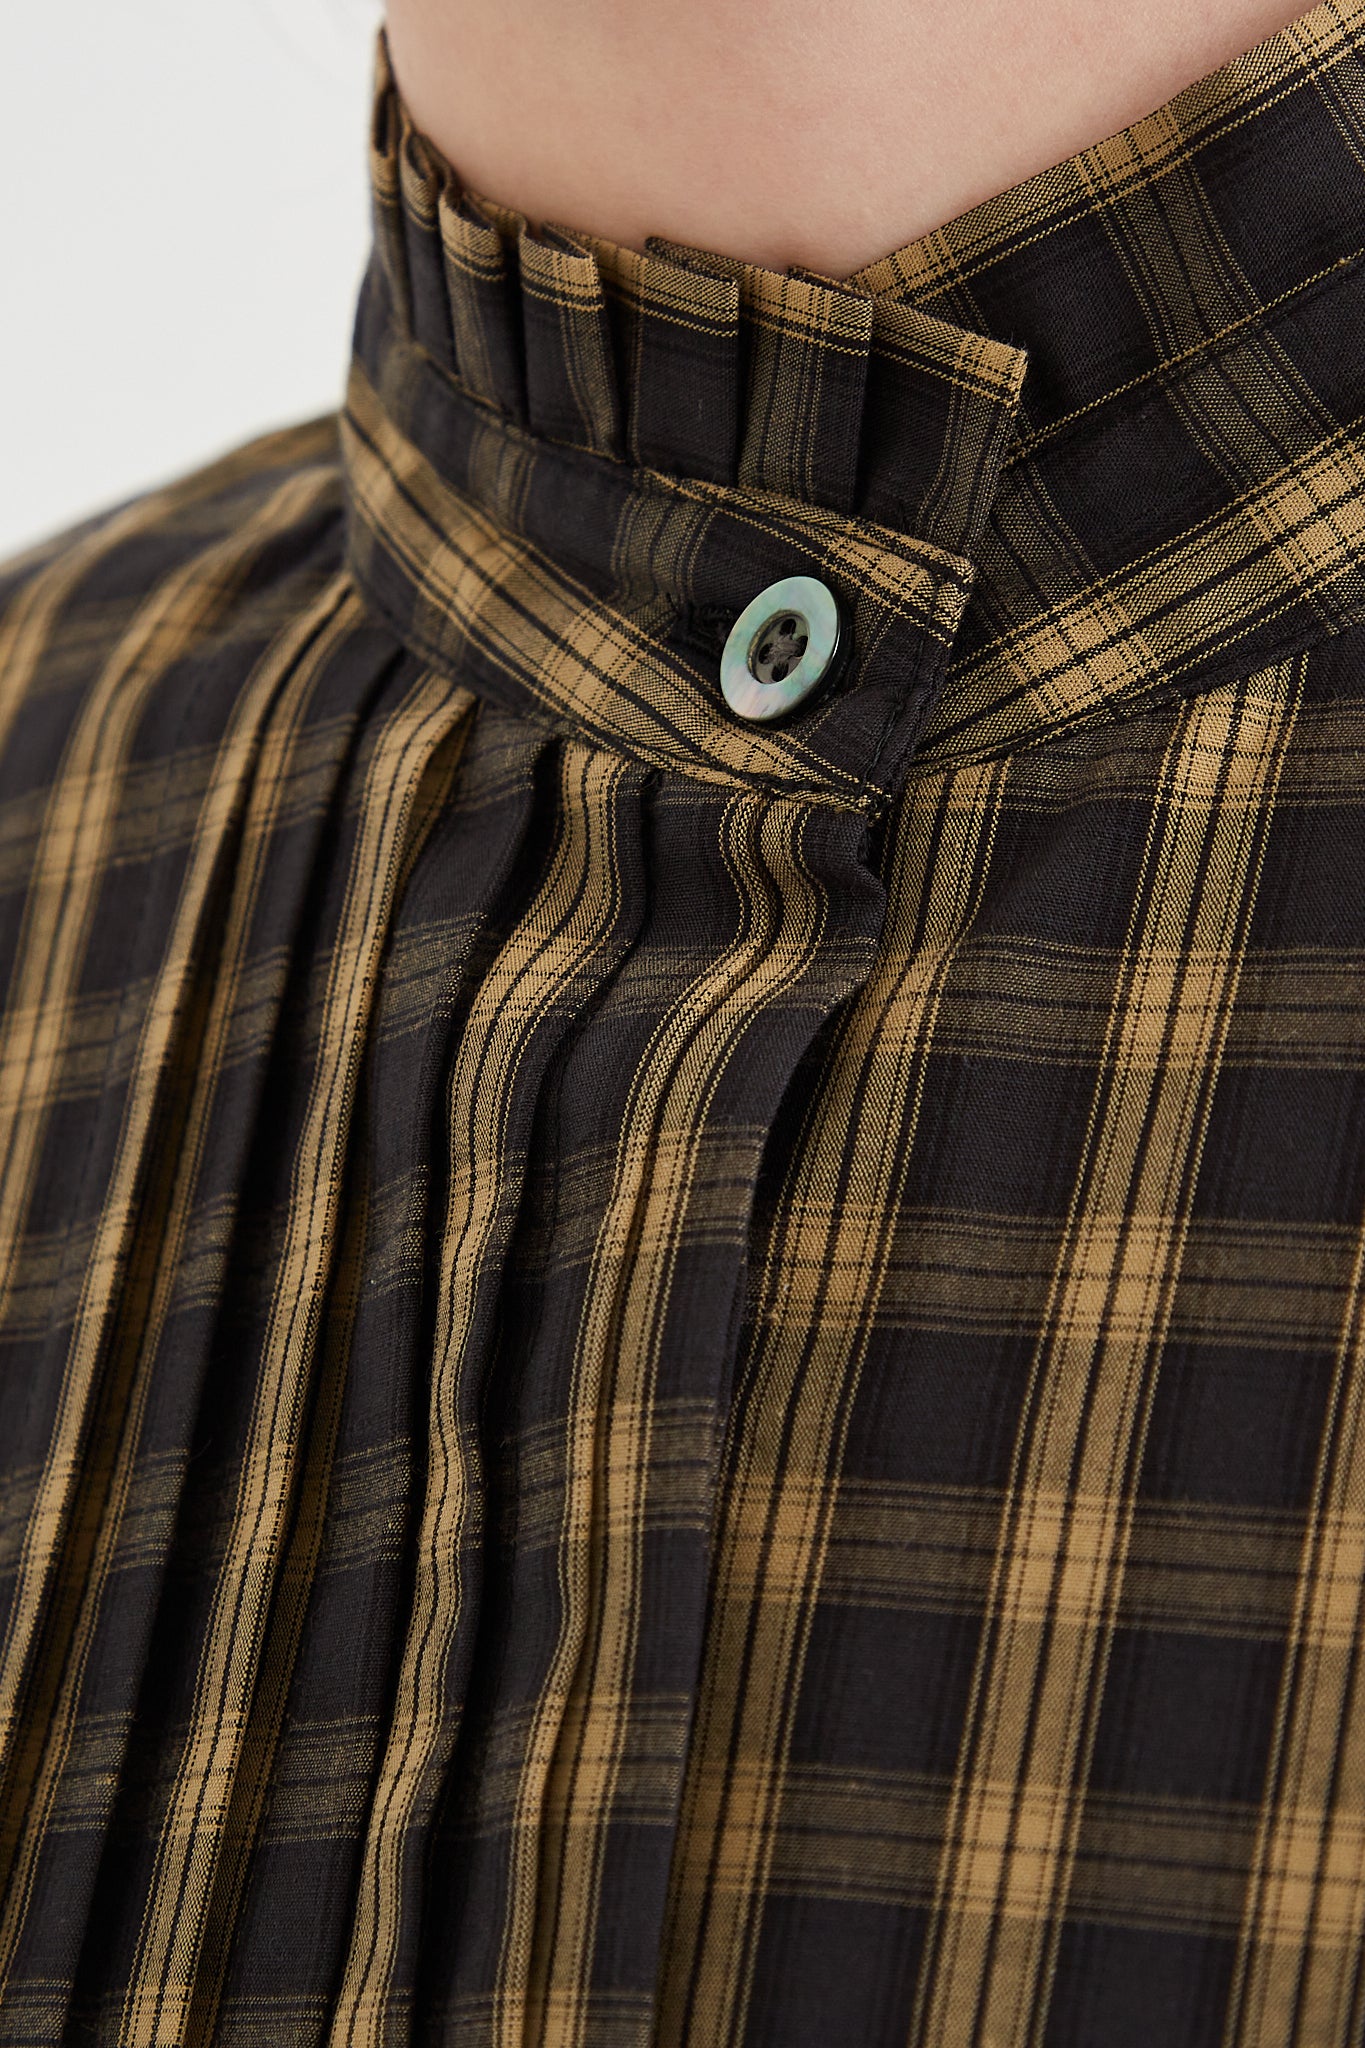 CHIMALA Pleated Stand Collar Shirt in Yellow Check - Oroboro Store | Front view and up close showcasing button detail on collar.